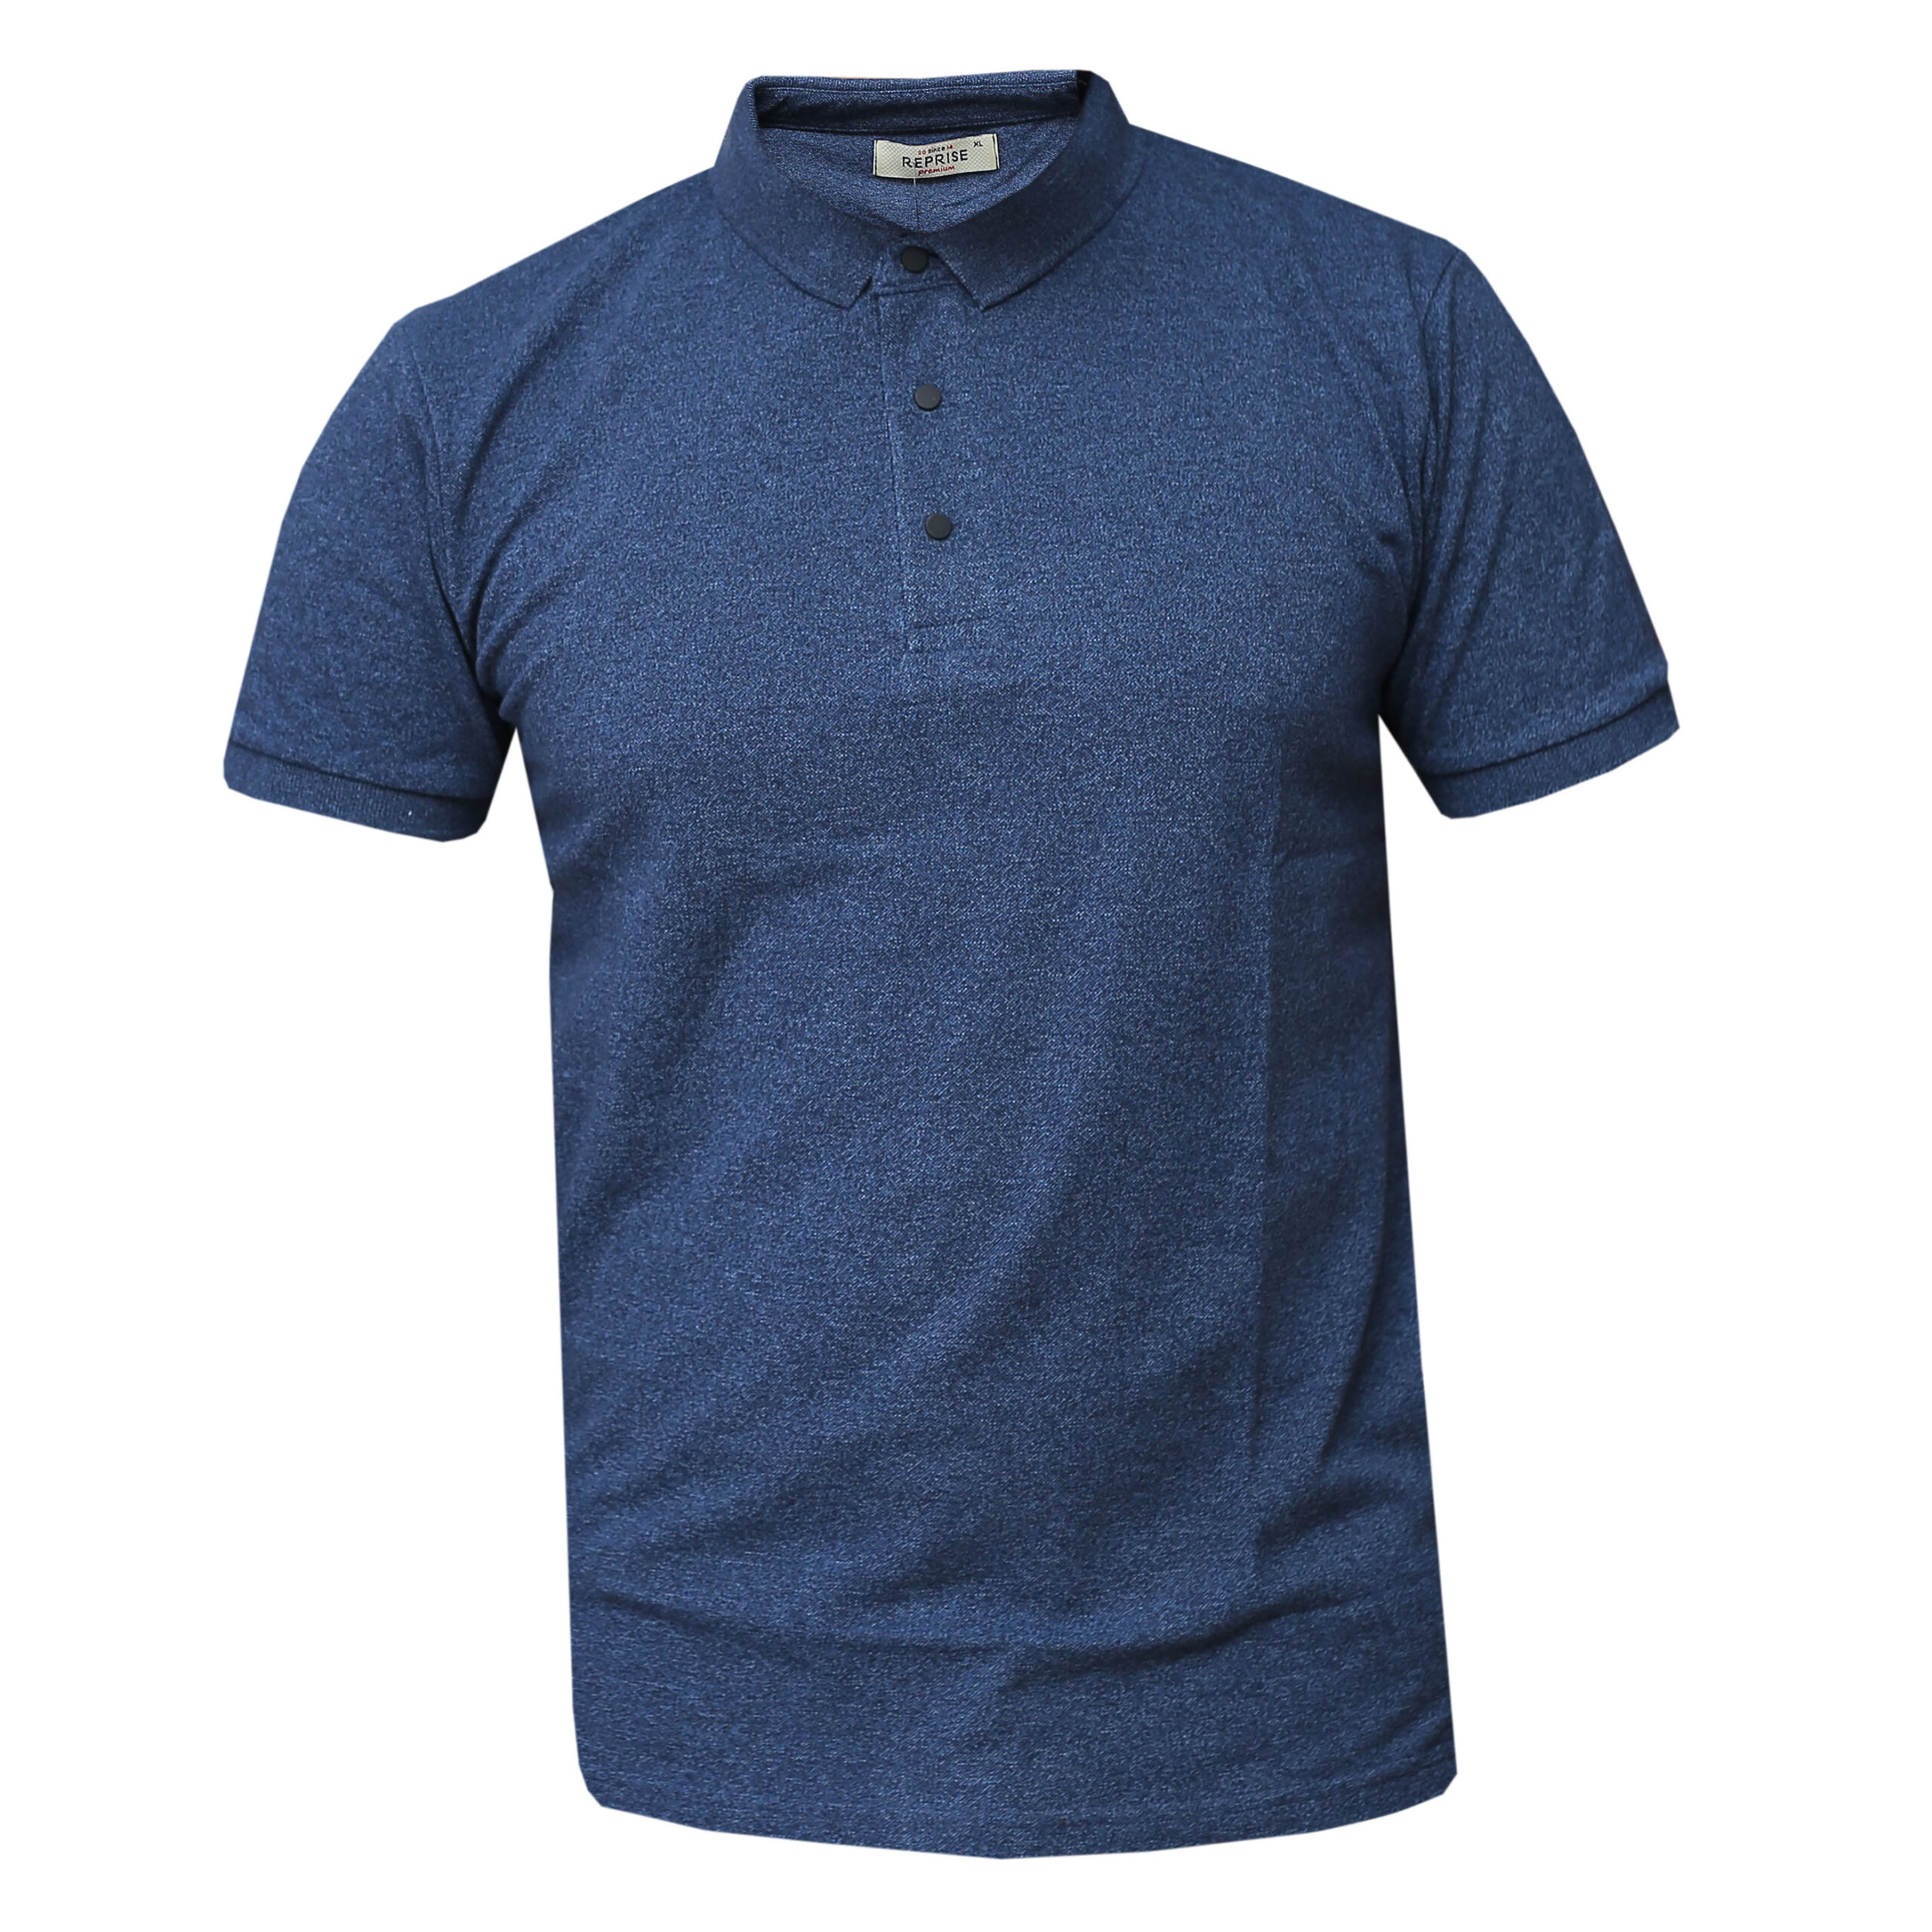 Collar T-Shirt for Men - Polo T-Shirts Casual Wear for Men